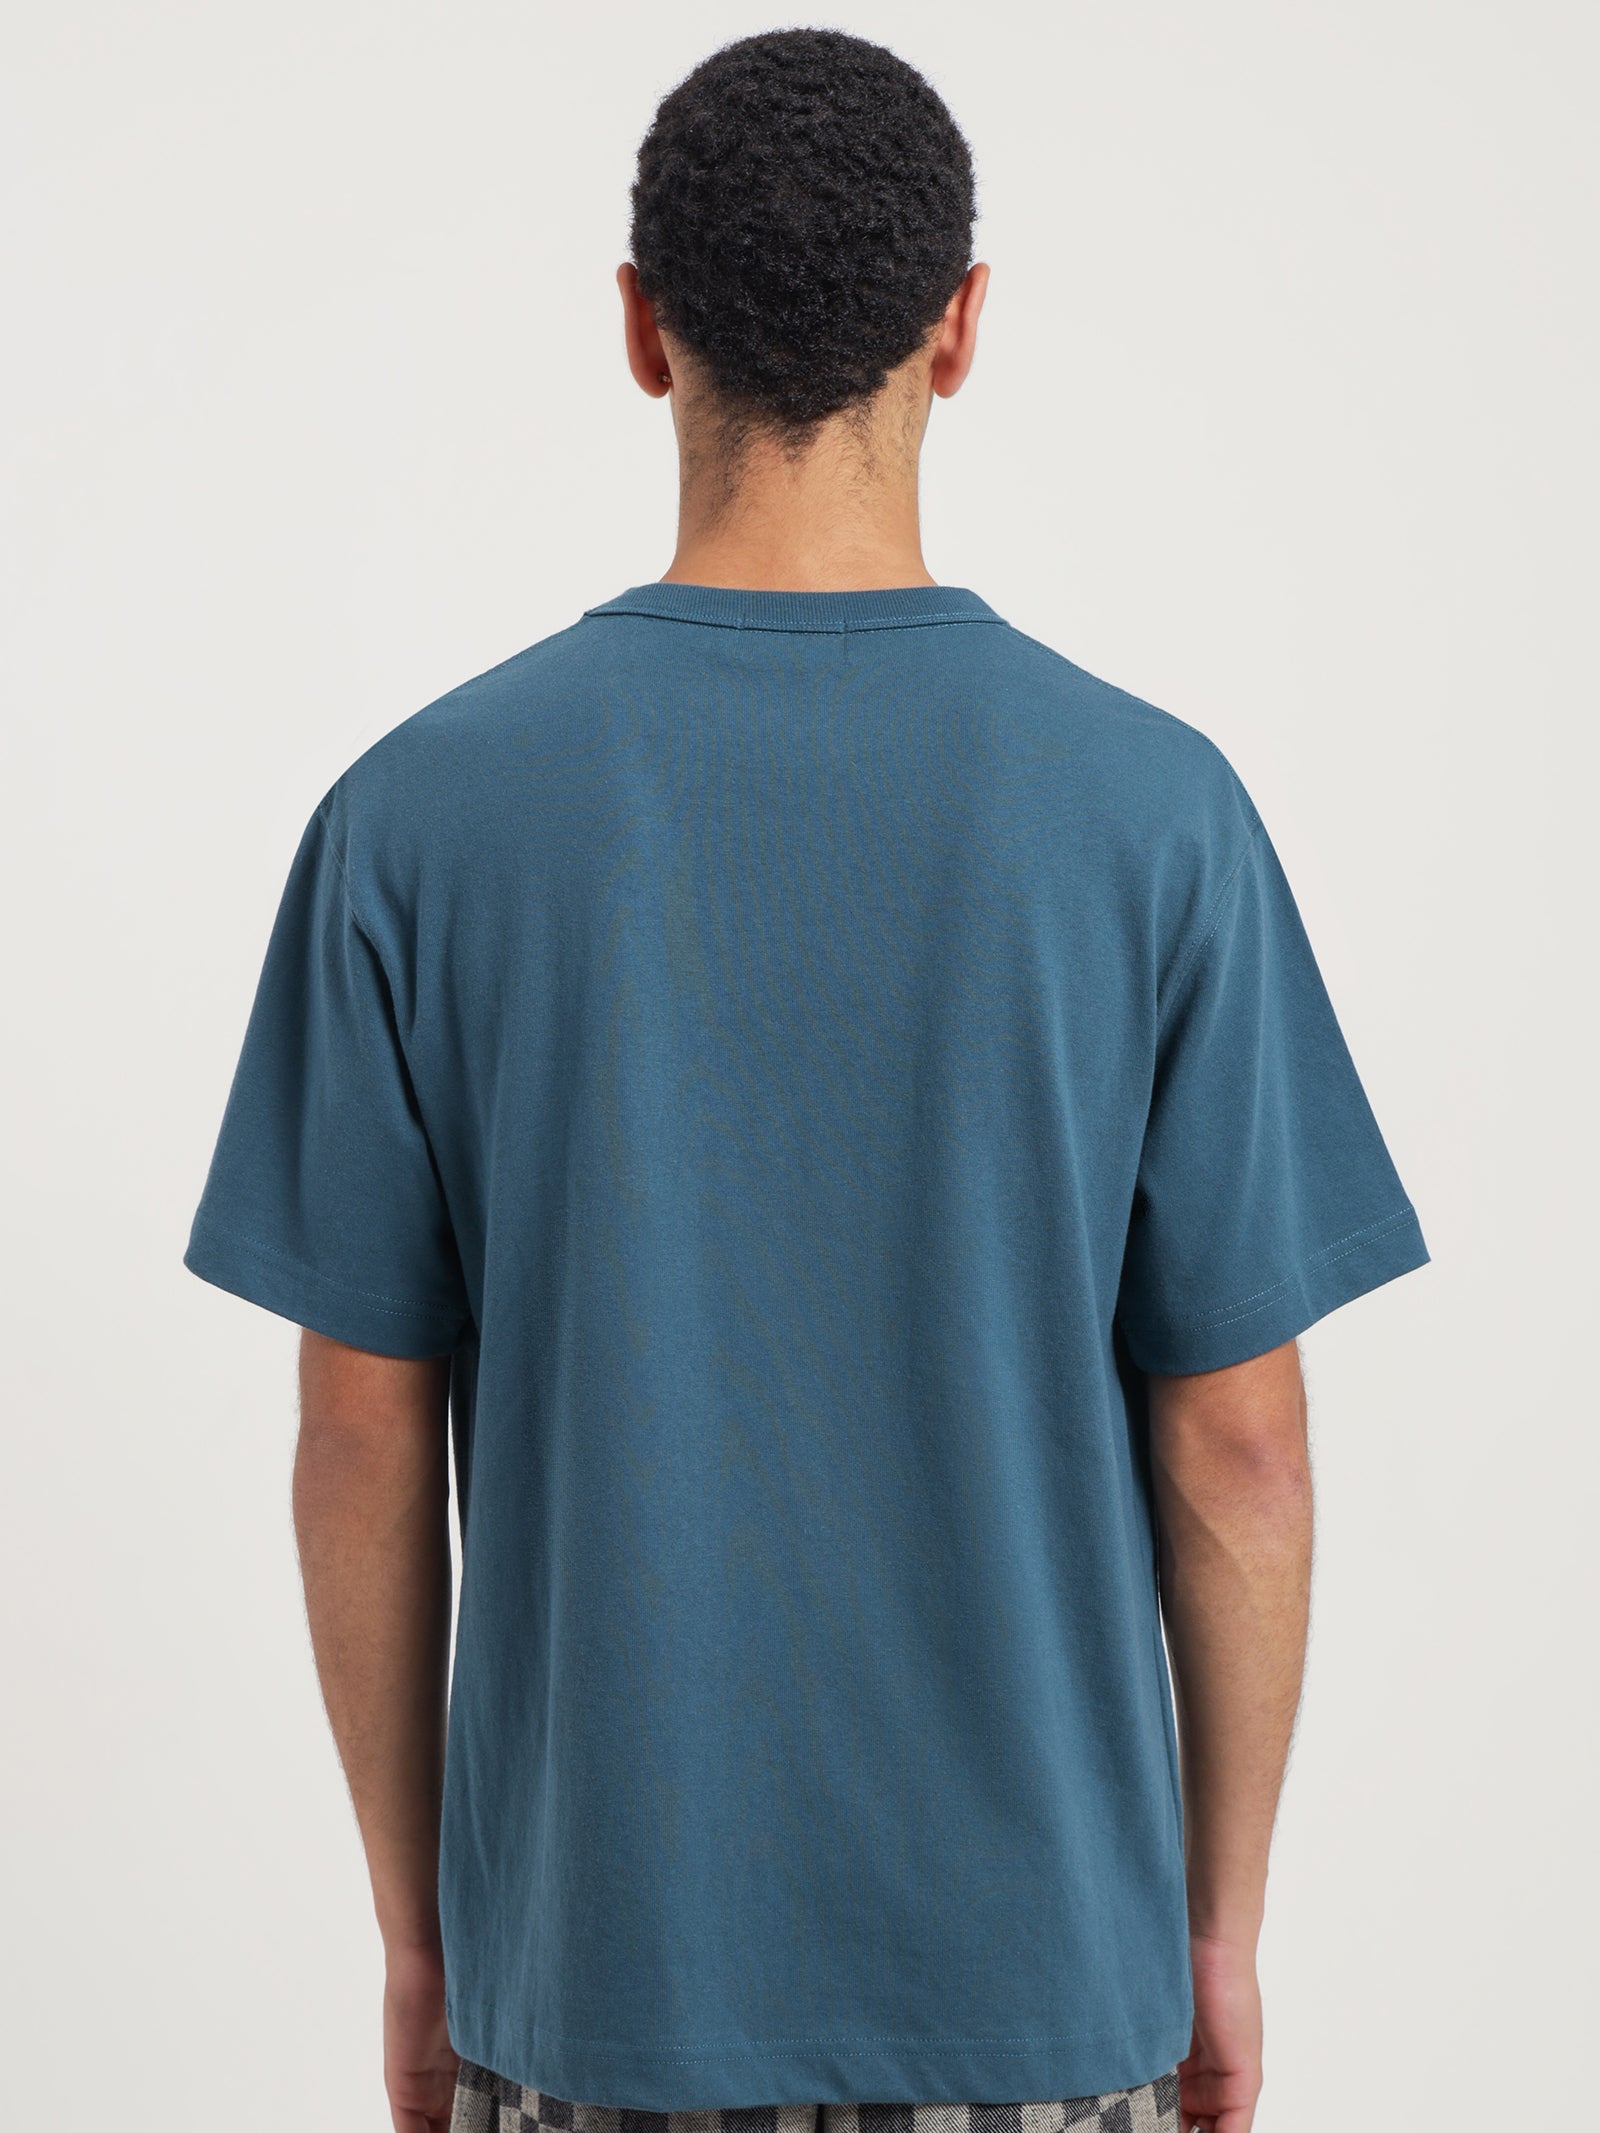 Heavyweight Crew T-Shirt in Pacific Blue - Glue Store